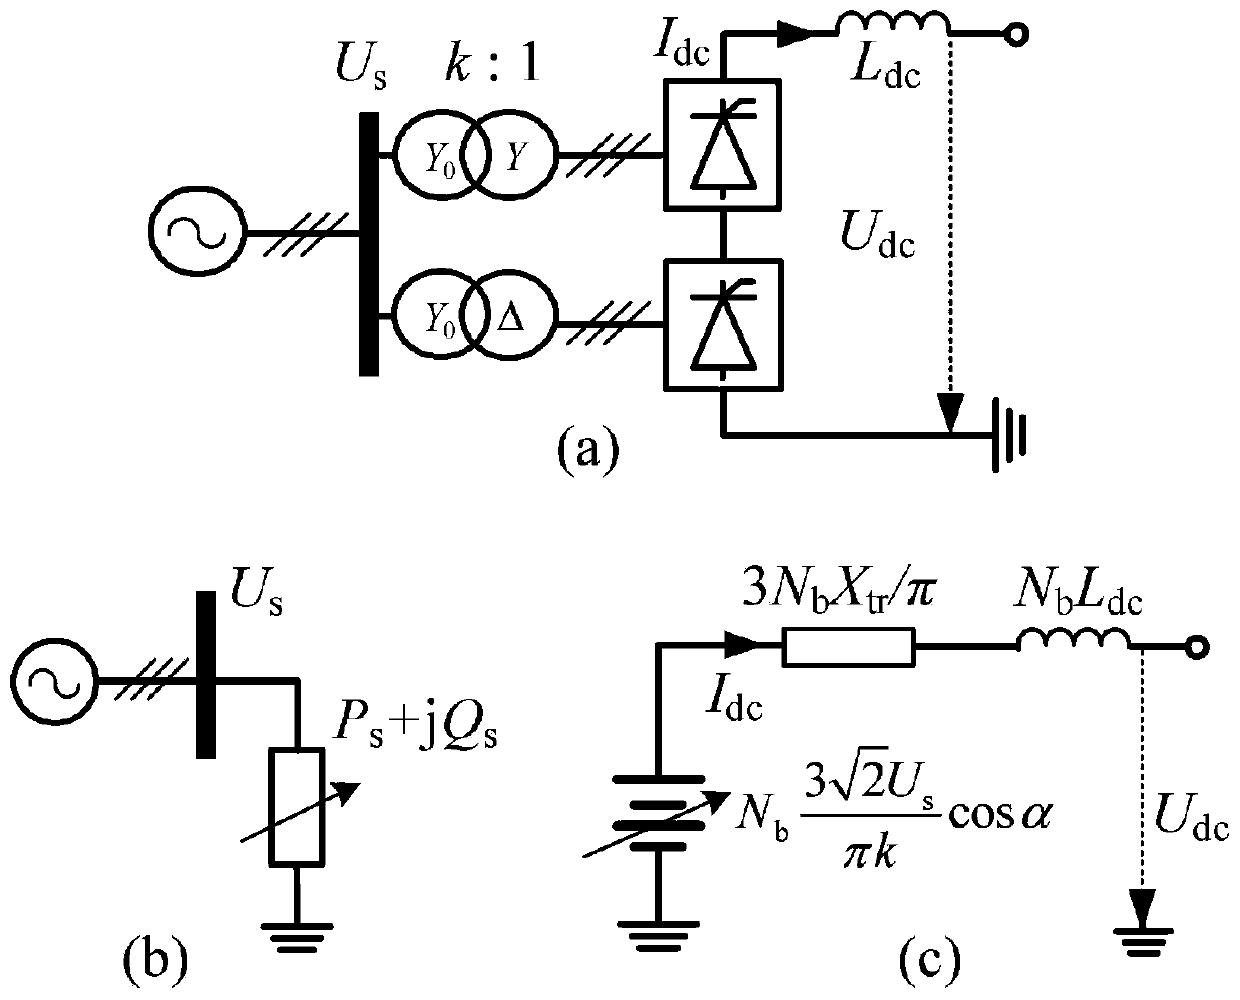 An Electromechanical Transient Modeling Method for a Decentralized Access LCC-MMC Hybrid DC System